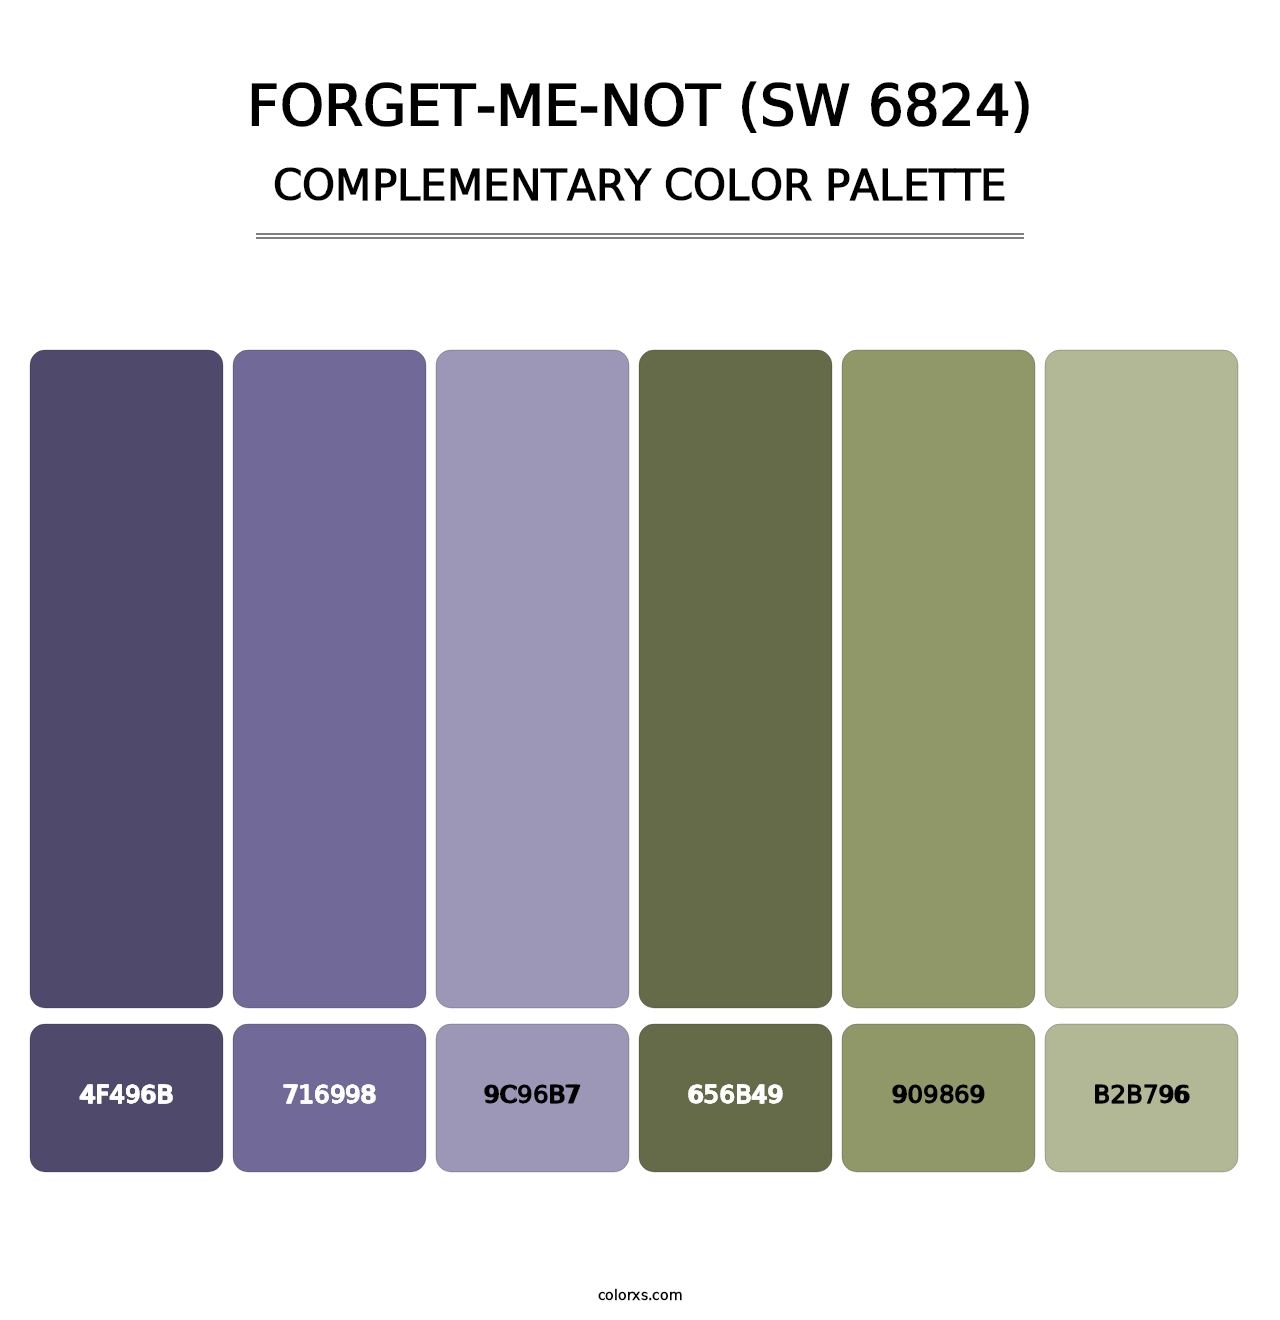 Forget-Me-Not (SW 6824) - Complementary Color Palette